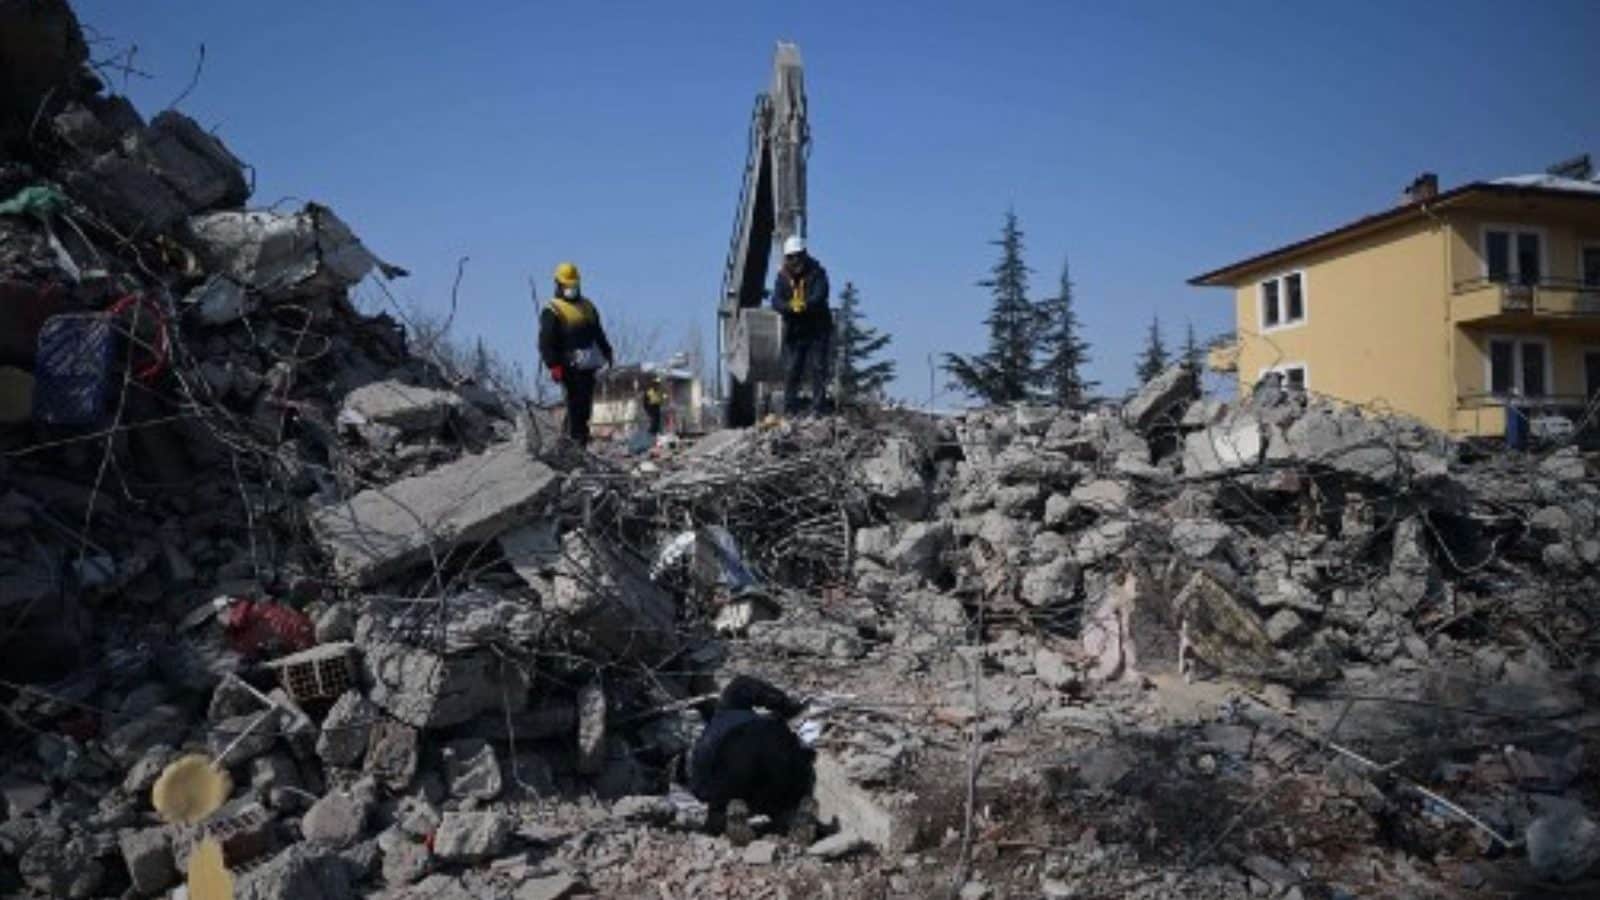 Earthquake in Turkey, Syria Killed More than 50,000 People: Revised Toll